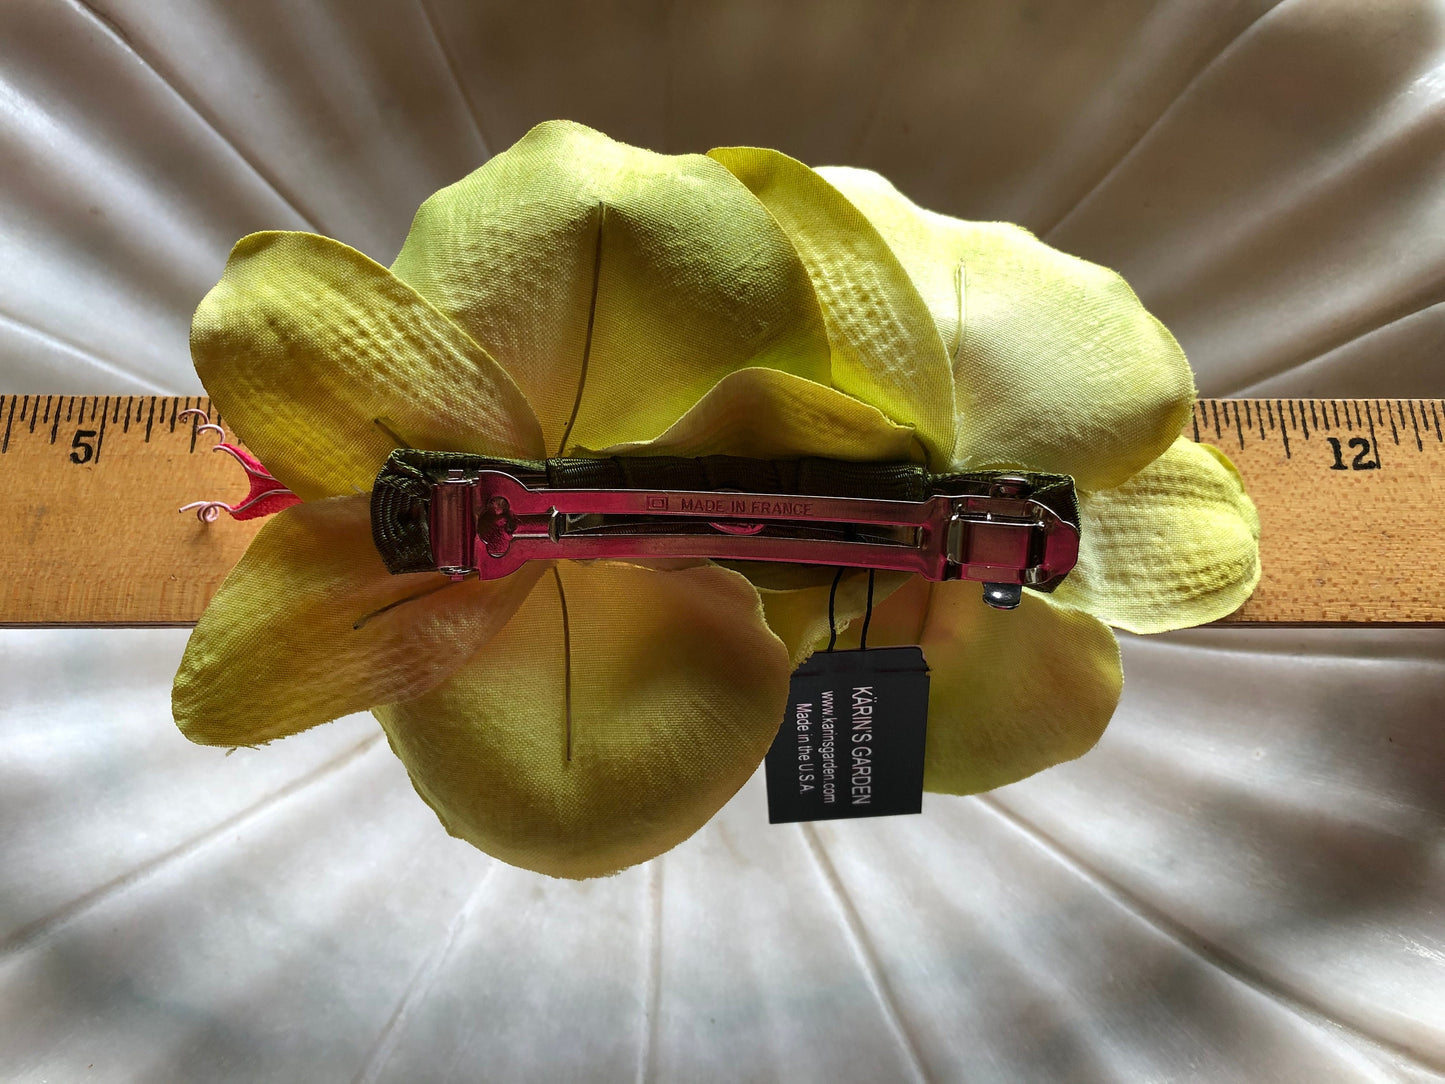 Phalaenopsis Orchid French Auto Barrette.  For your Hair! Karin's Garden - Made in the USA - Tropical Vacation Ready - Life like Orchids